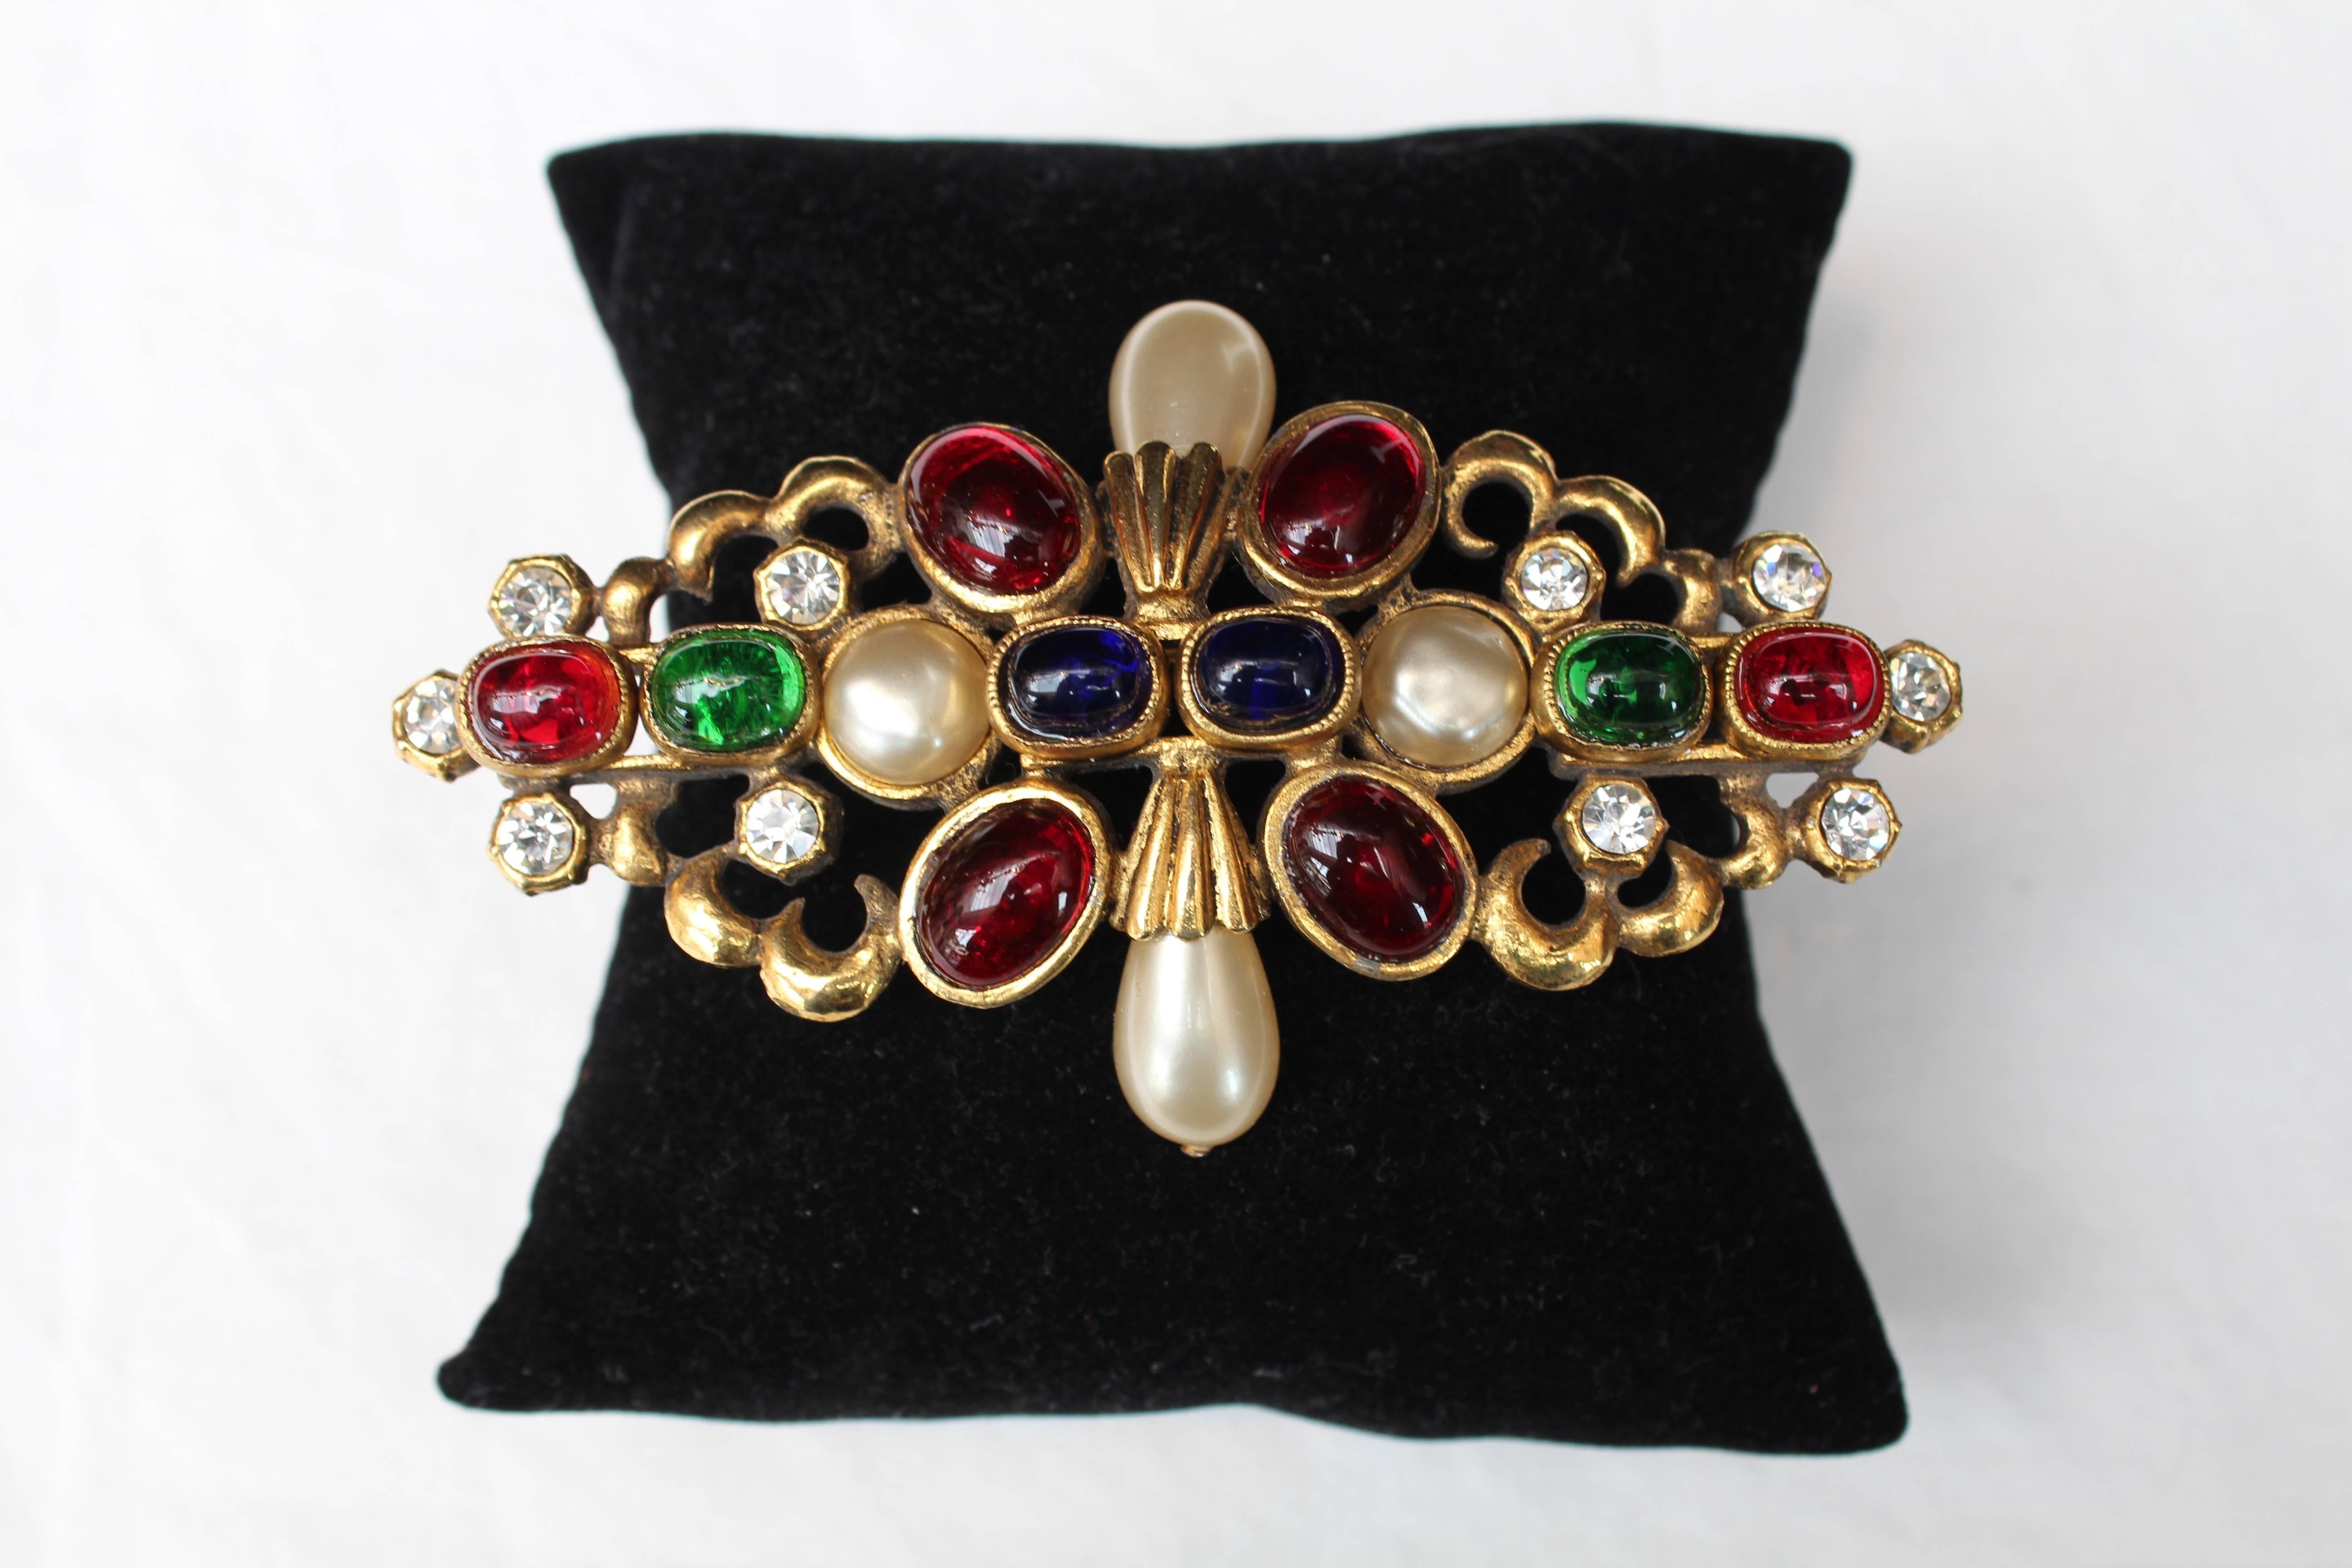 CHANEL (Made in France) - Brooche composed of blue, green and red glass paste cabochons with faux pearls and rhinestones.The basis is made of engraved gilted metal.

Signed at back.

Fall 1984.

Very good condition.


10 cm (3.94 in) x 5.5 cm (1.9